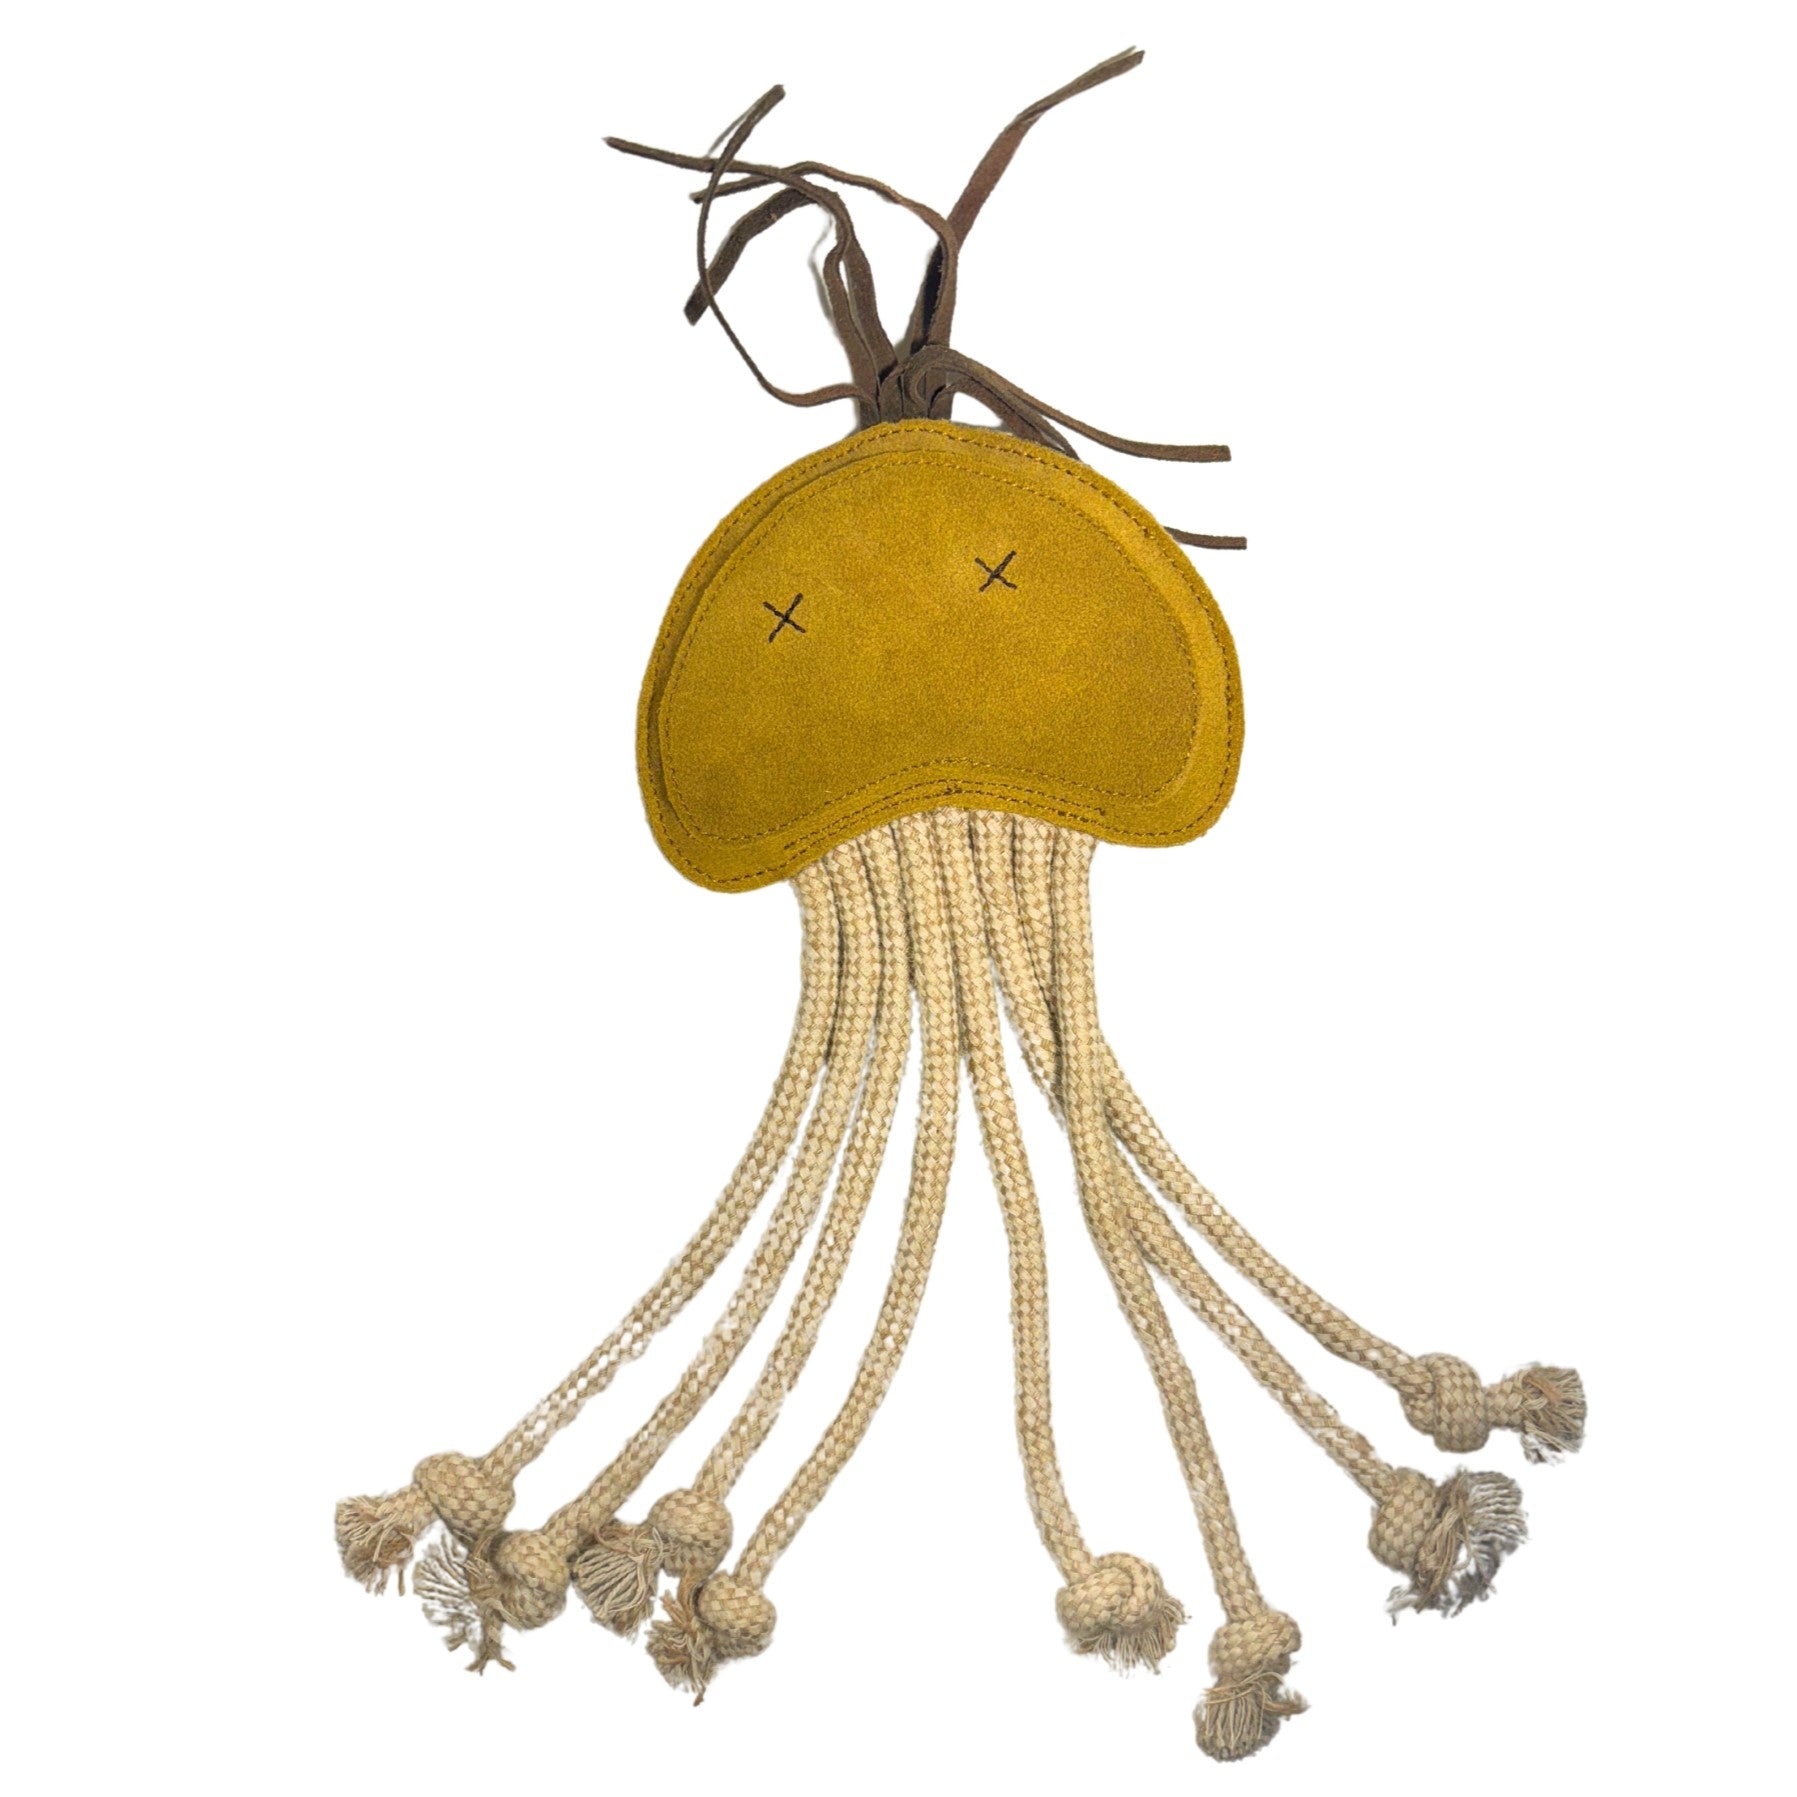 A Joe Jellyfish stuffed toy with a mustard yellow top marked with stitched "x" eyes, and long cream-colored tentacles made from eco-friendly cotton rope, ending in knotted details, isolated on a white background by Georgie Paws.